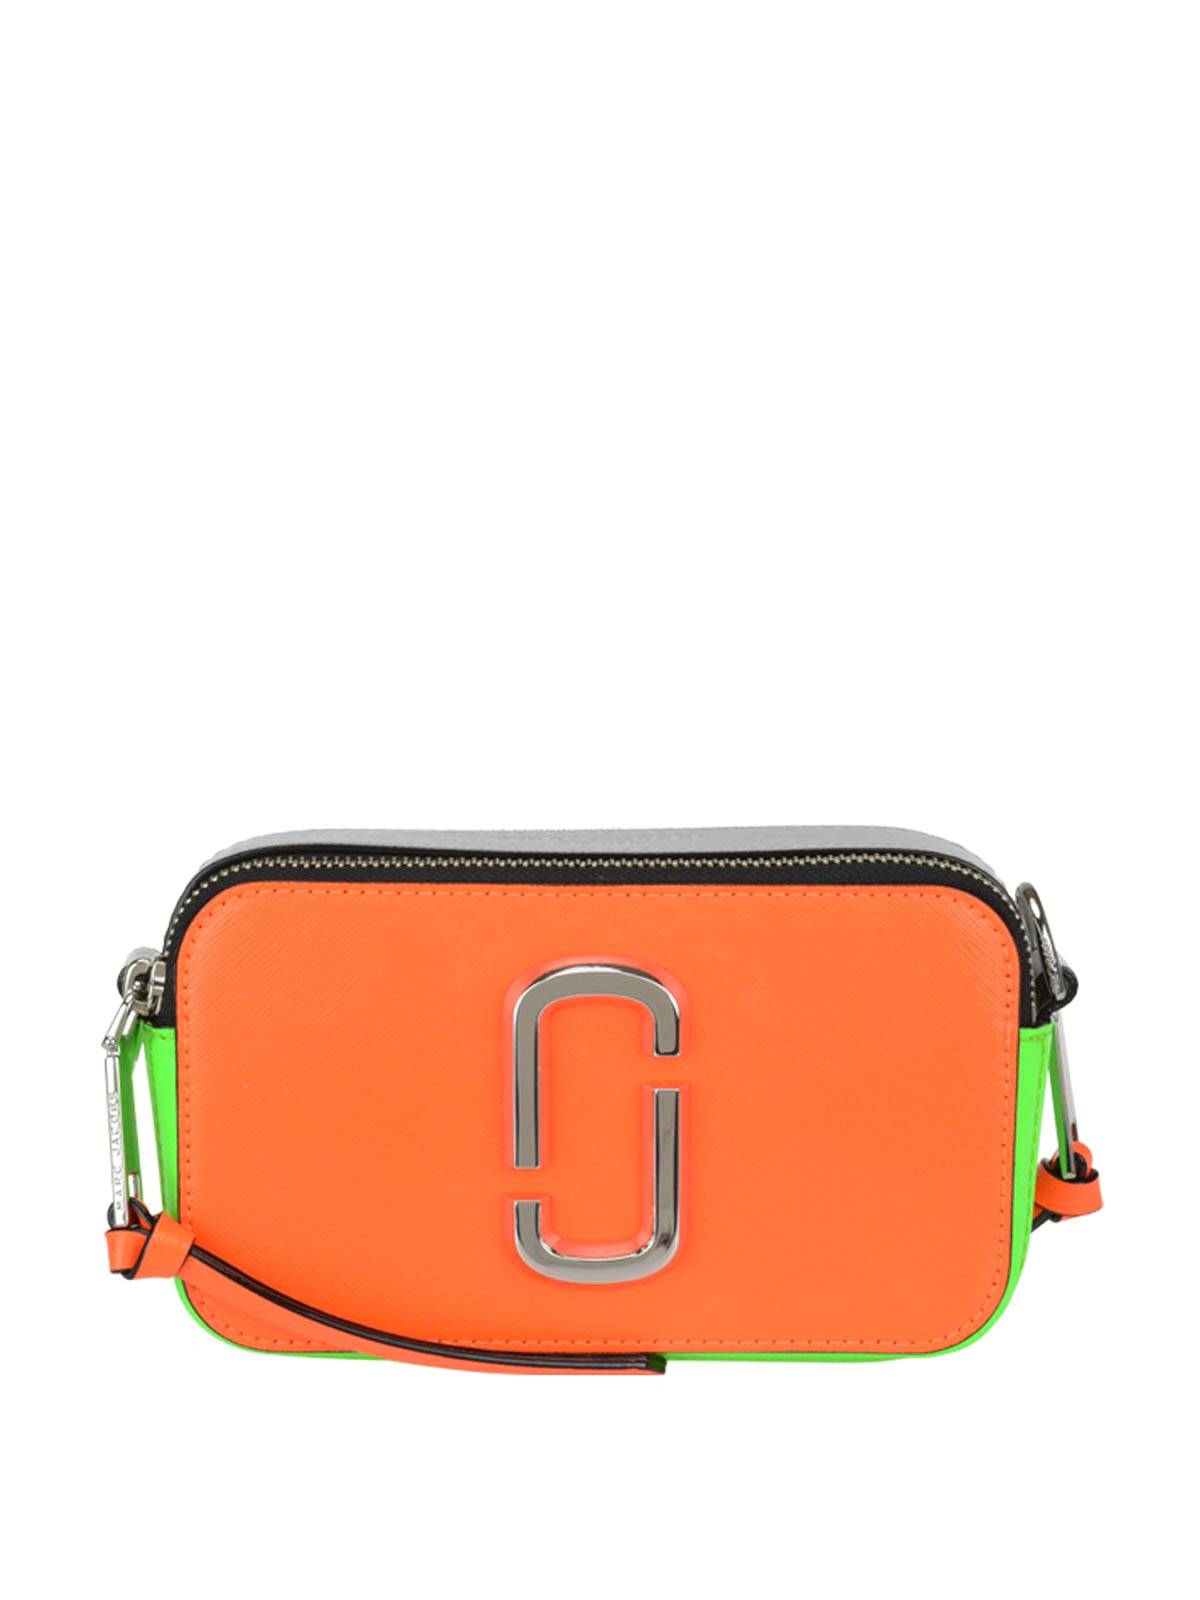 MARC JACOBS: The Snapshot bag in tricolor saffiano leather